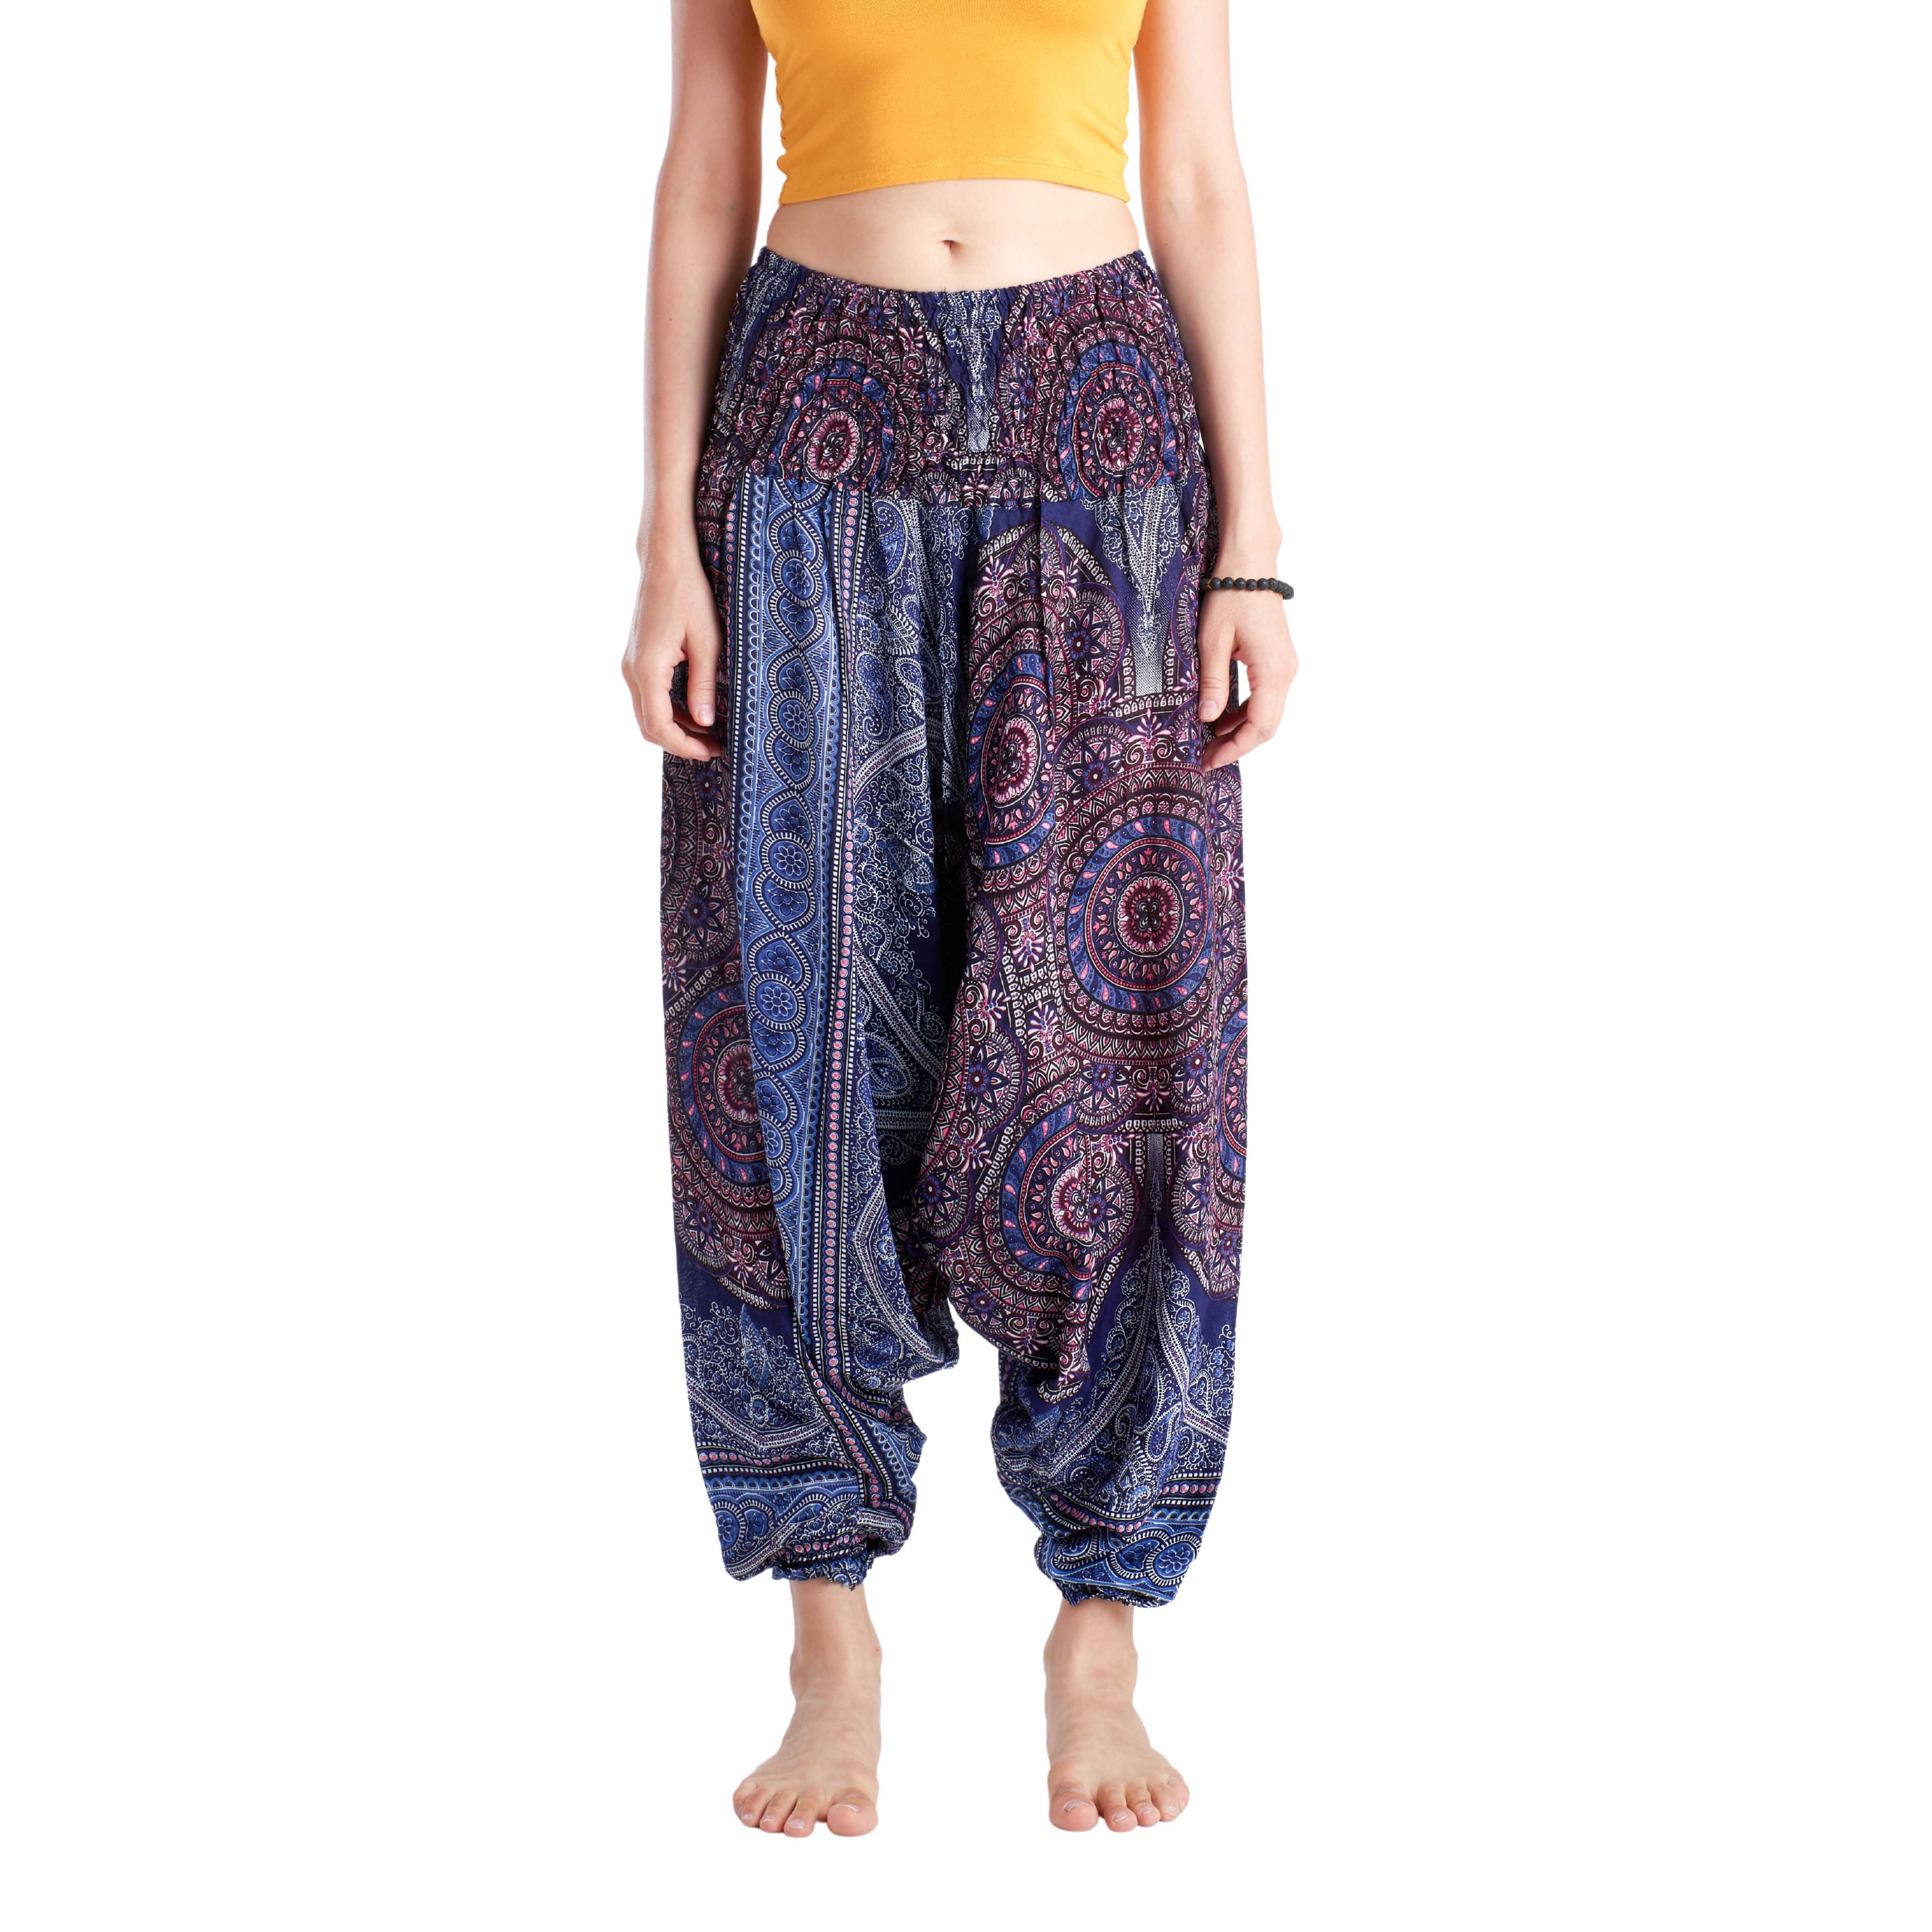 AGRABAH YOGA PANTS Elepanta Hippie Pants | Yoga - Buy Today Elephant Pants Jewelry And Bohemian Clothes Handmade In Thailand Help To Save The Elephants FairTrade And Vegan